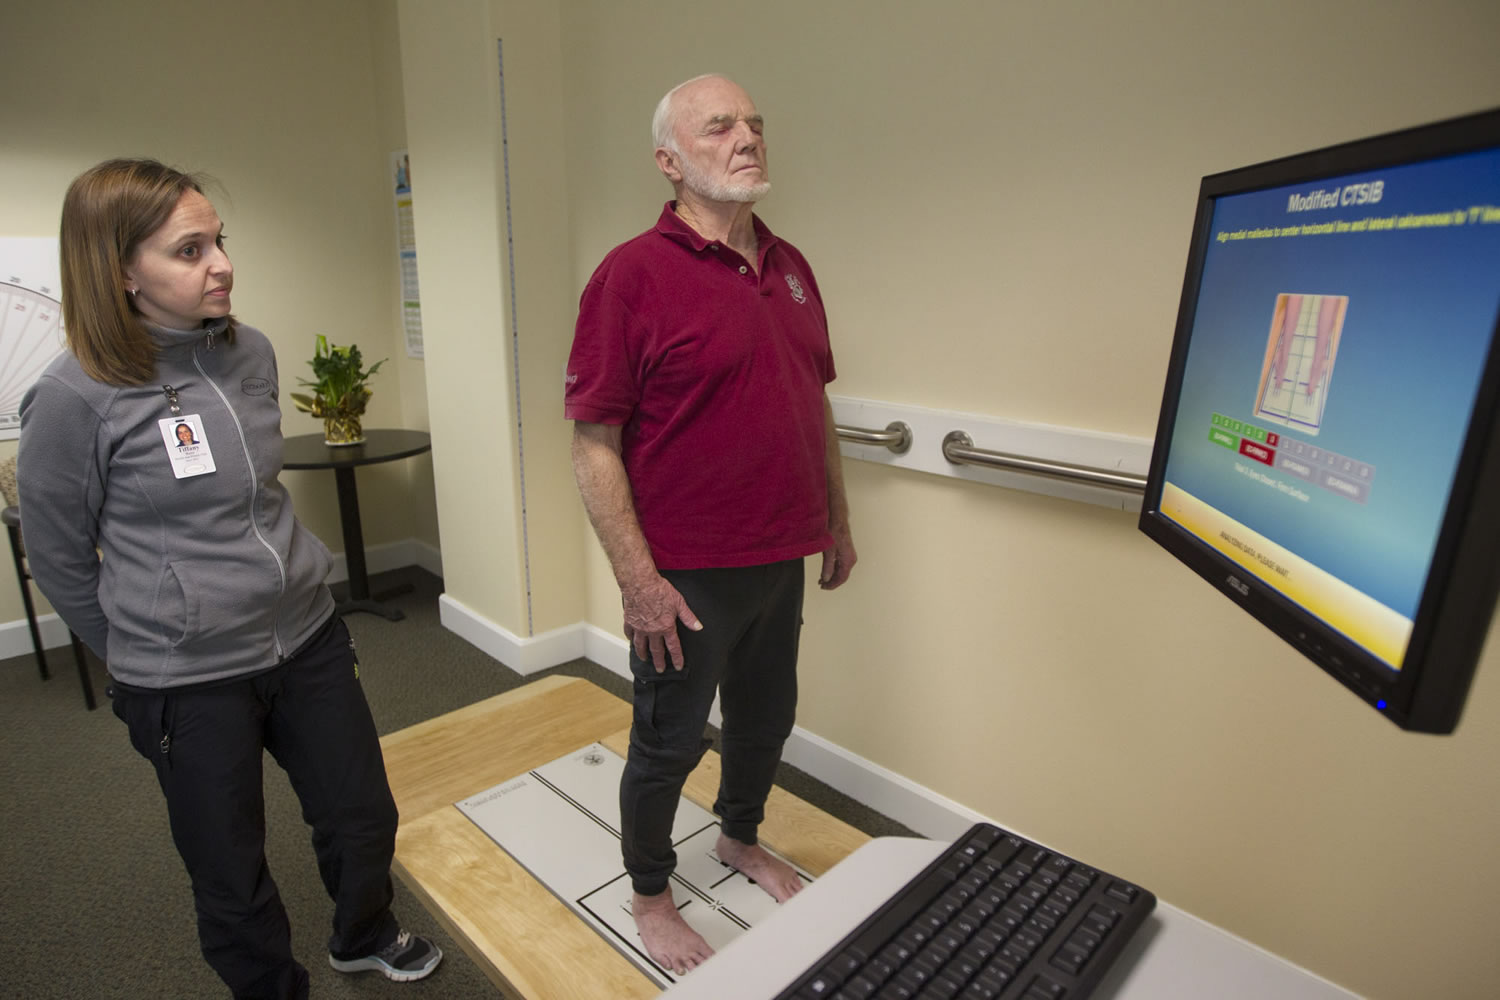 Vancouver resident John Marshall, 77, under the guidance of exercise specialist Tiffany Bunn, tests his balance on new Balance Master technology at Touchmark at Fairway Village in Vancouver.